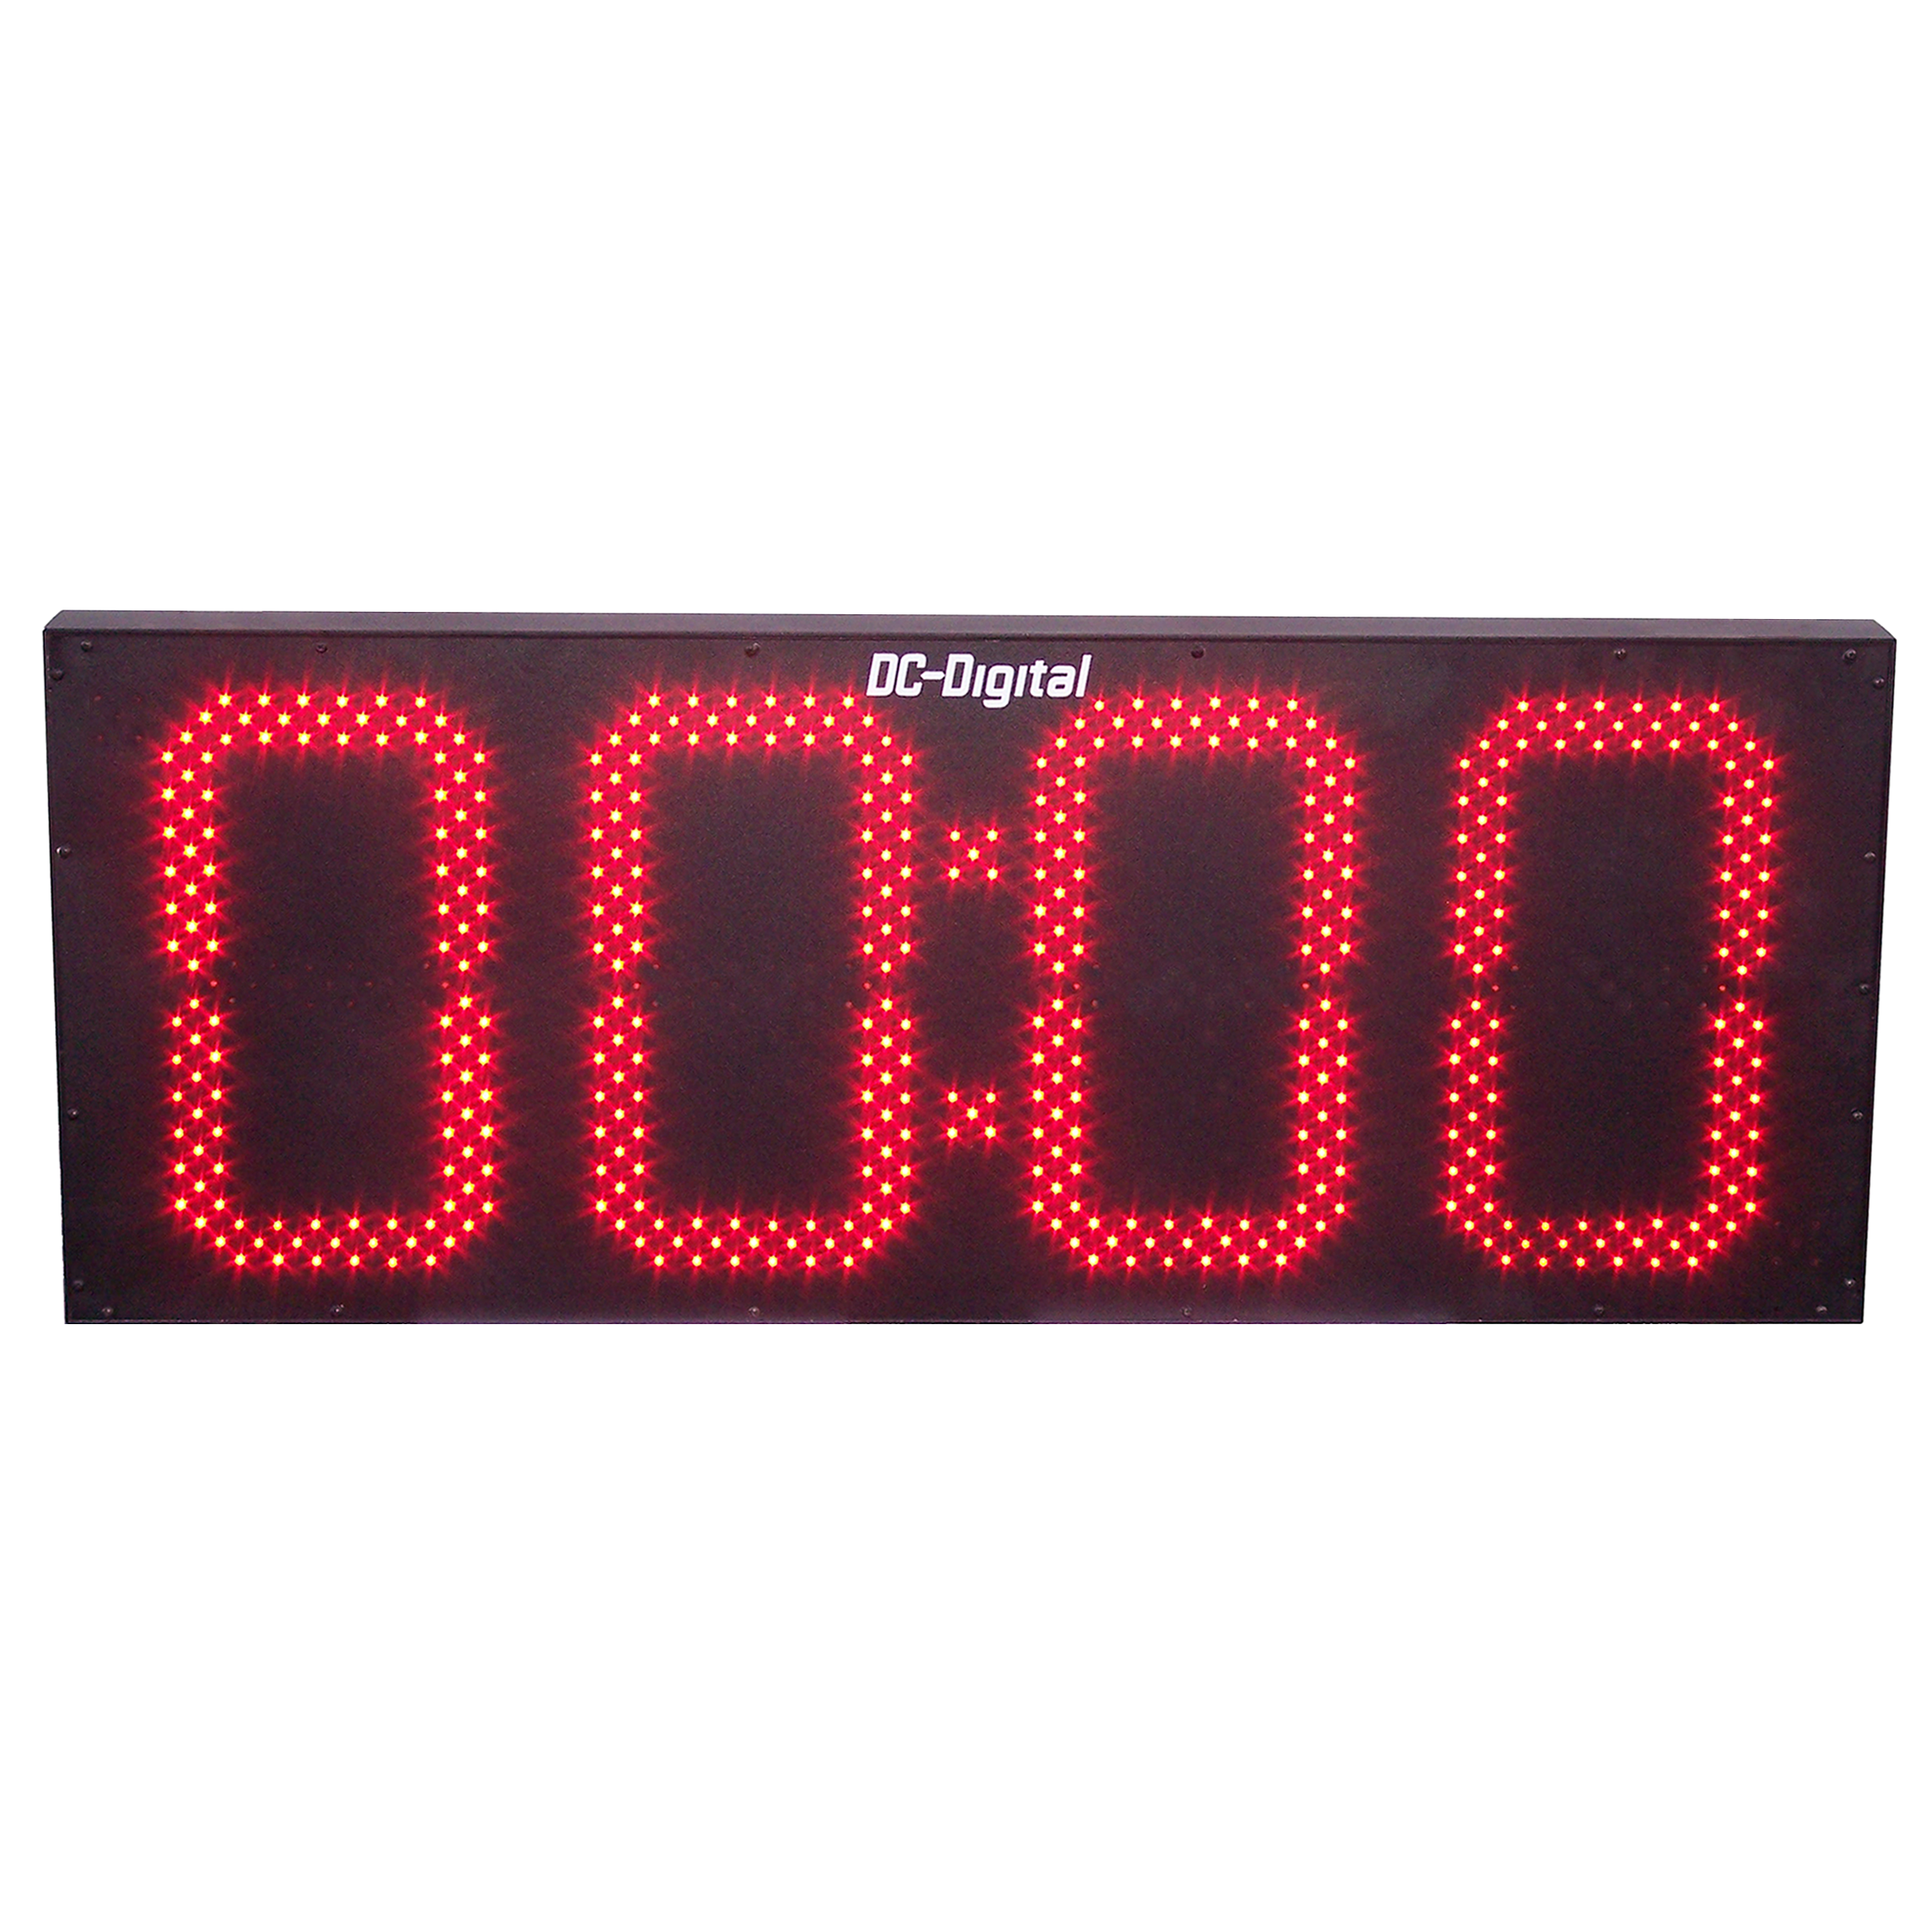 (DC-150T-DN-BCD) 15.0 Inch LED Digital, BCD Rotary Set Switches, Multi-Input (PLC-Relay-Switch-Sensor) Controlled, Countdown Timer (OUTDOOR)